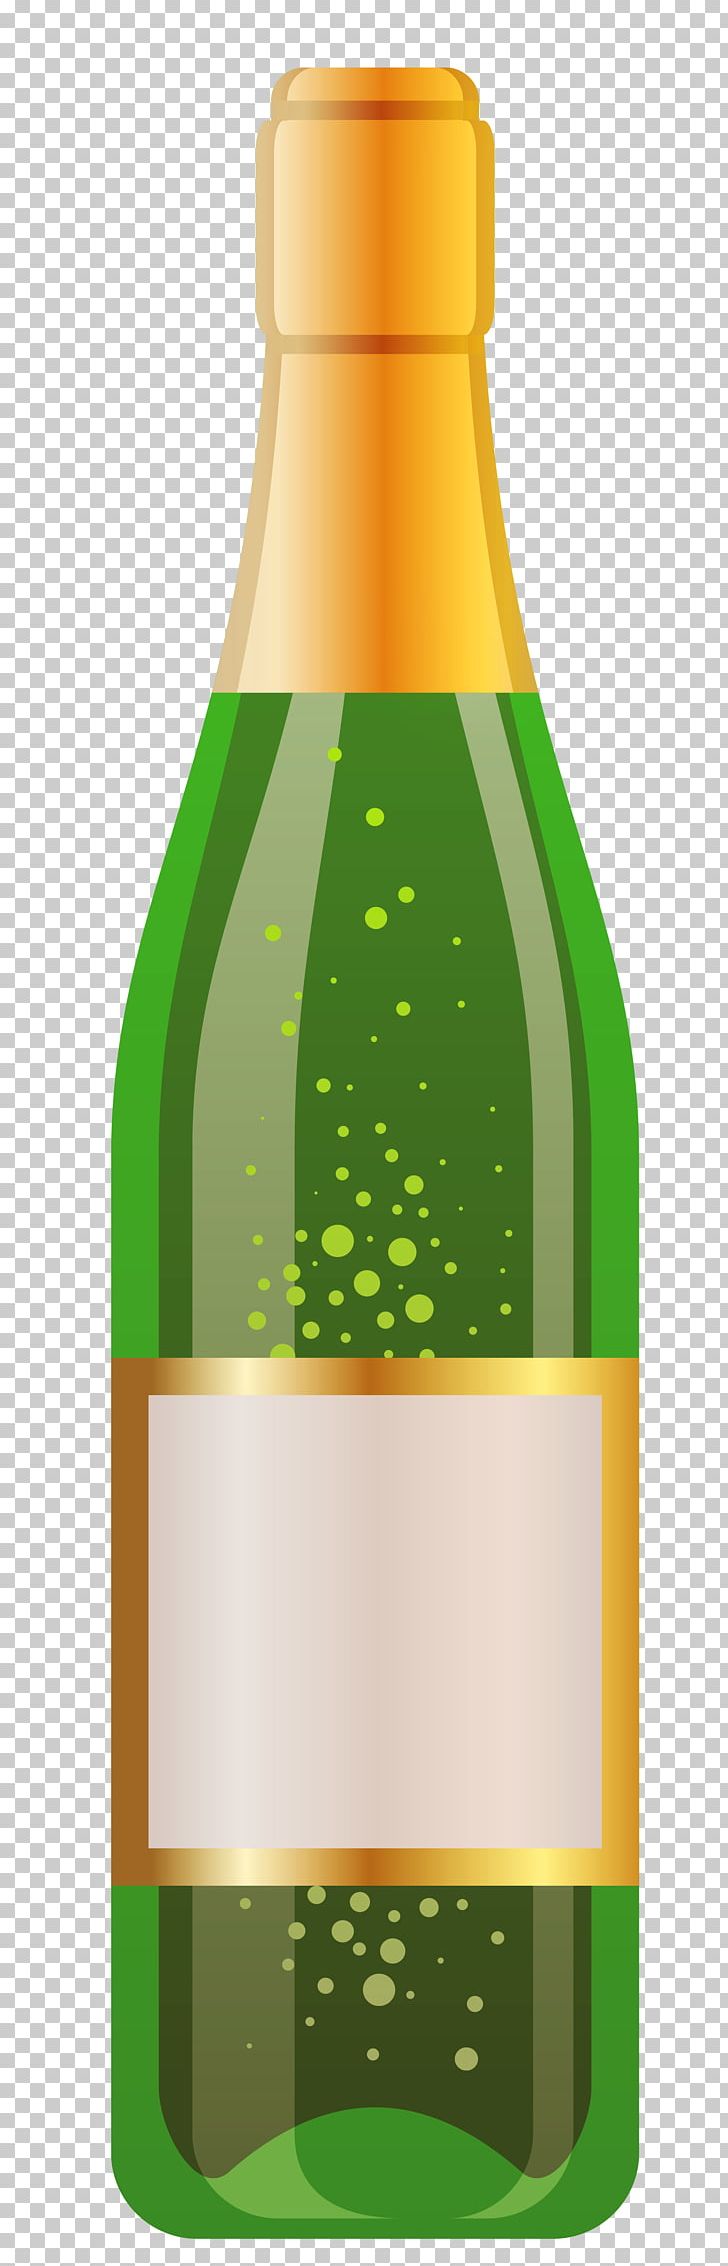 White Wine Red Wine Champagne PNG, Clipart, Beer Bottle, Beer Glasses, Bottle, Champagne, Computer Icons Free PNG Download